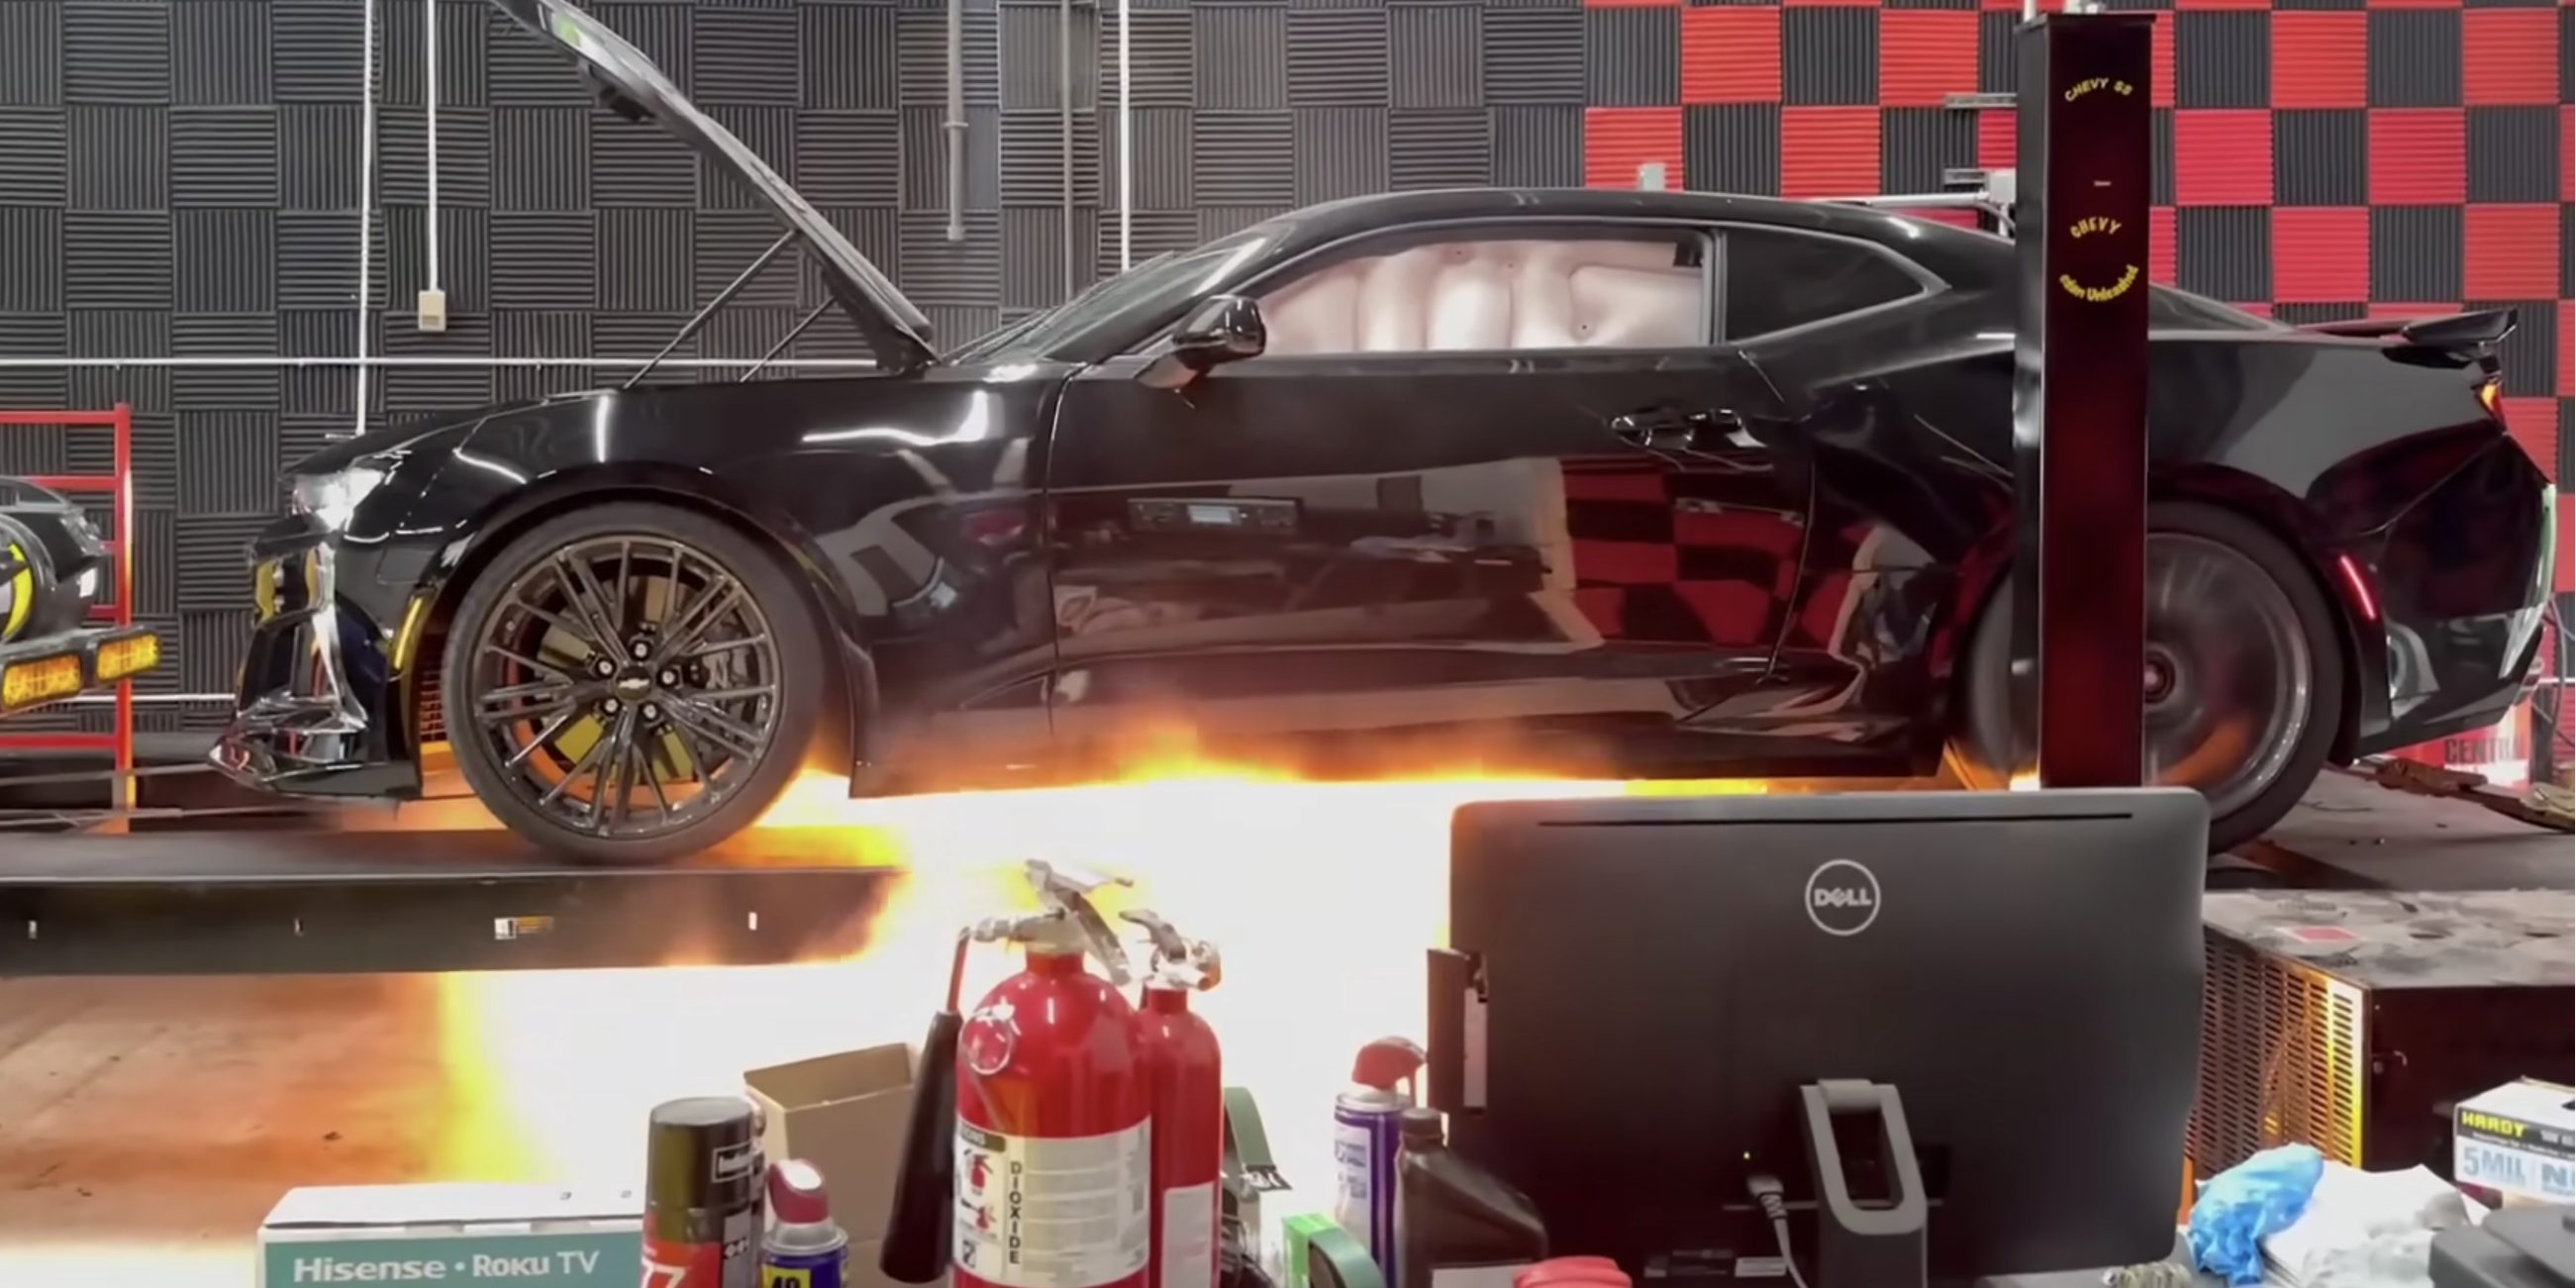 Video: Chevy Camaro ZL1 Gearbox Explodes on Dyno, Sets Off Airbag and Catches Fire